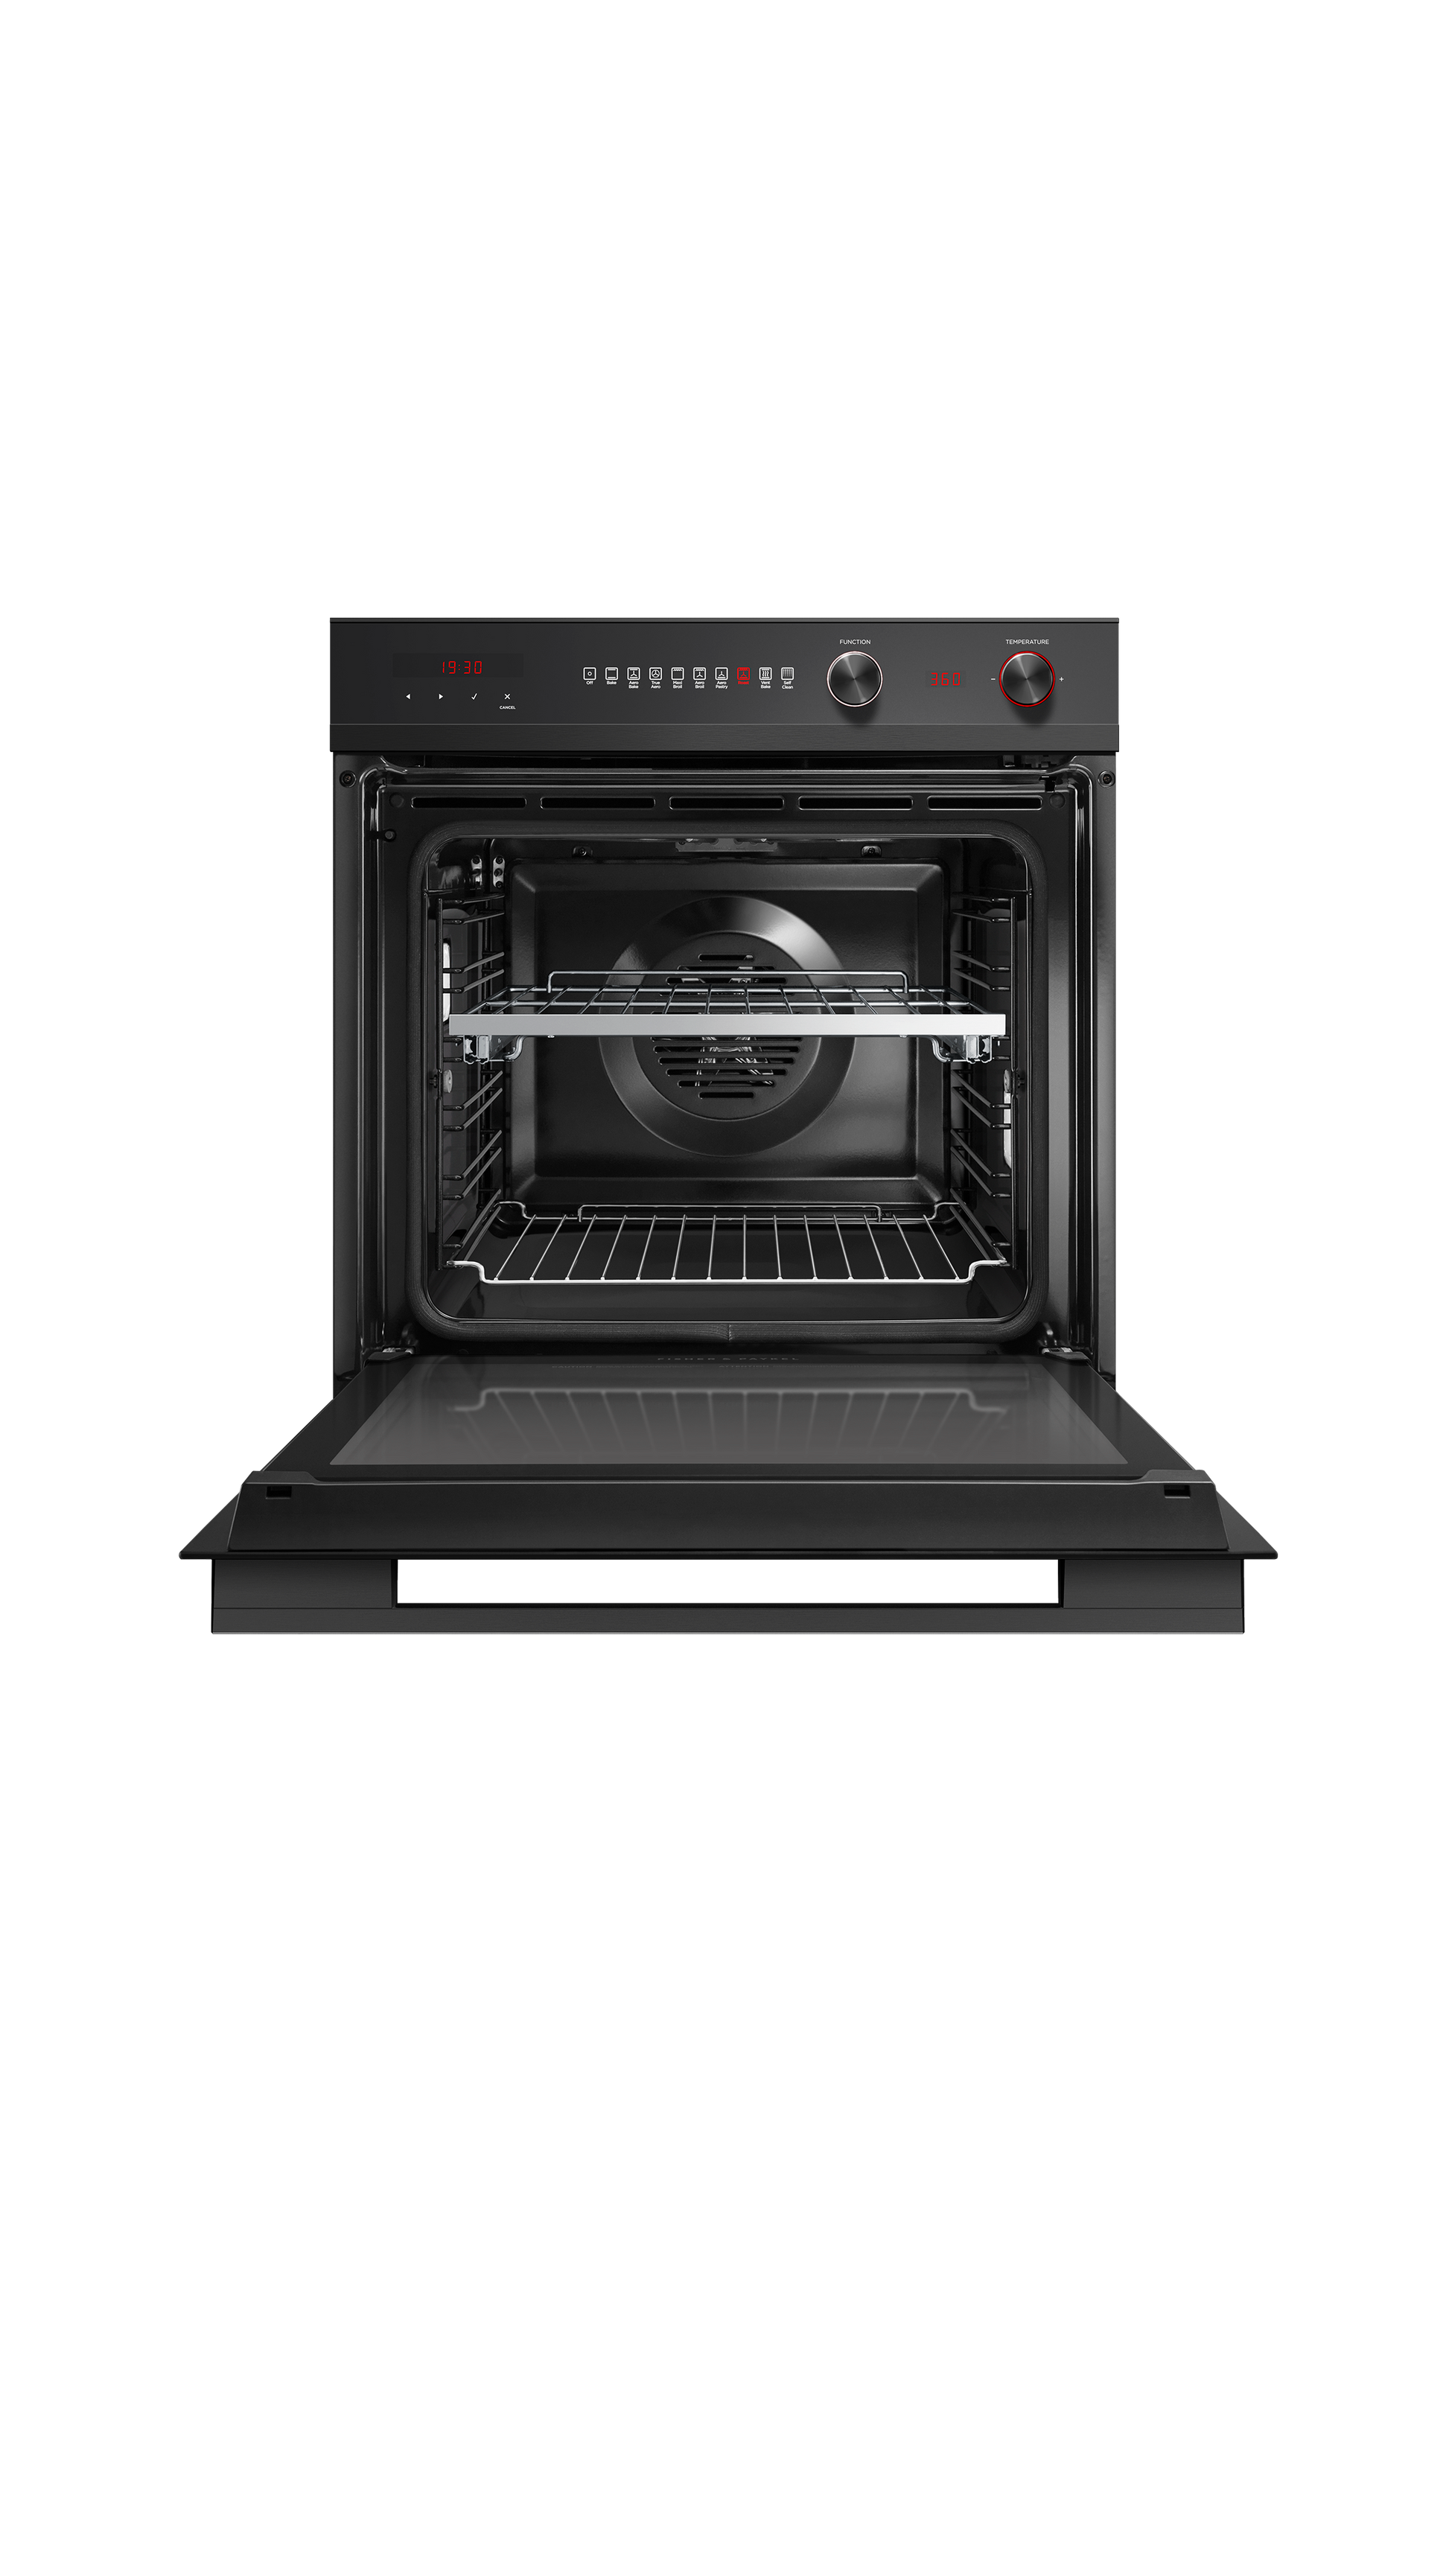 Oven, 24", 9 Function, Self-cleaning, 84-mug-open